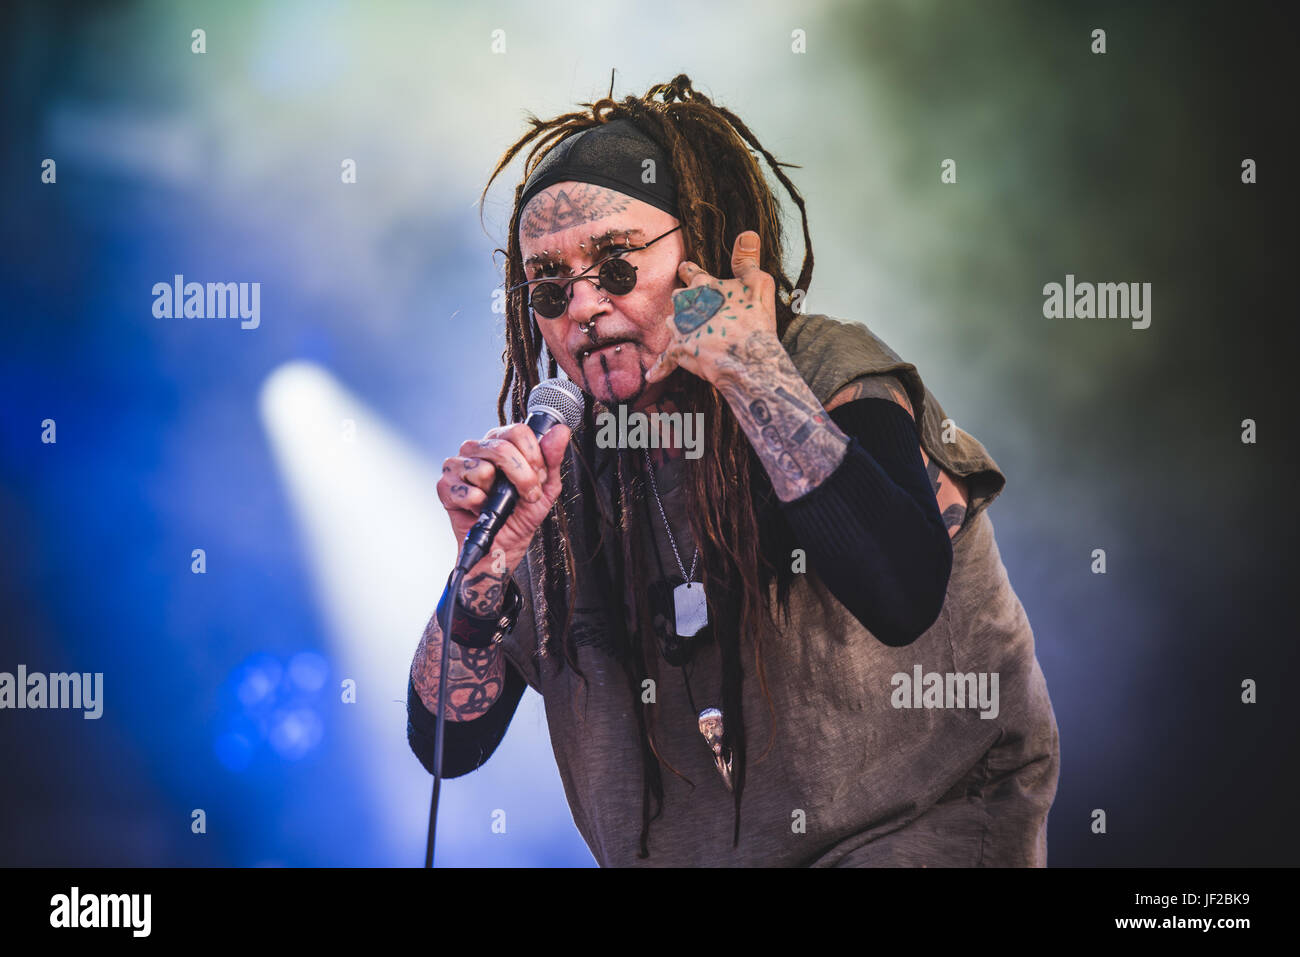 June 16, 2017: Ministry performing live at the Hellfest Festival 2017 in Clisson, near Nantes Photo: Alessandro Bosio Stock Photo